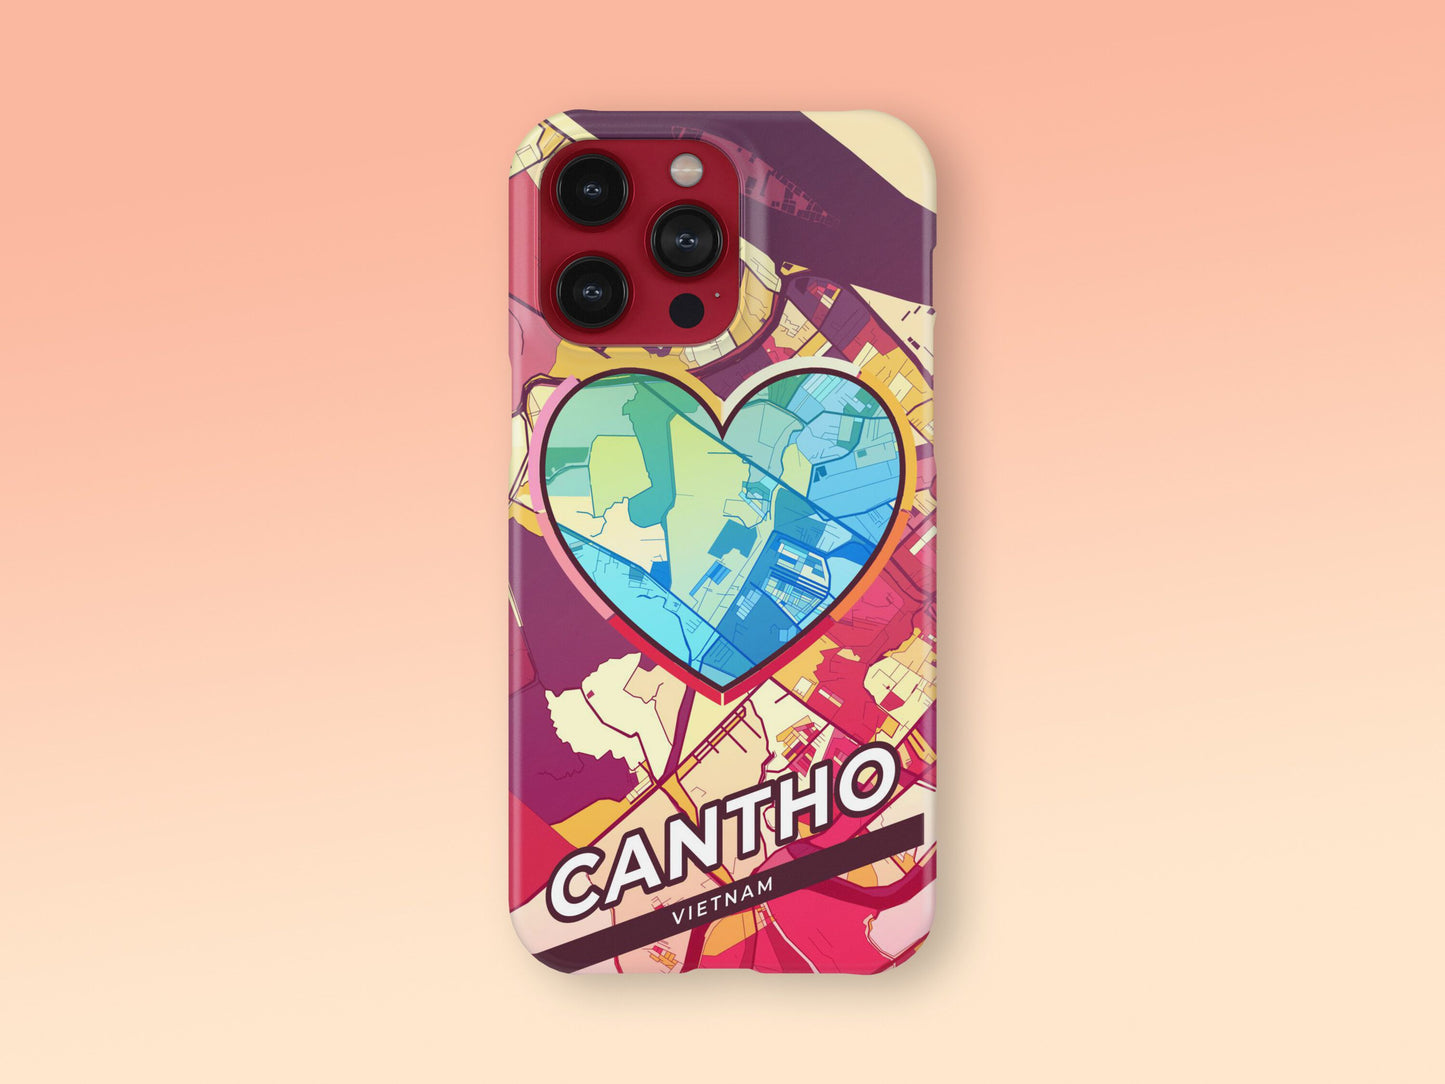 Cantho Vietnam slim phone case with colorful icon. Birthday, wedding or housewarming gift. Couple match cases. 2